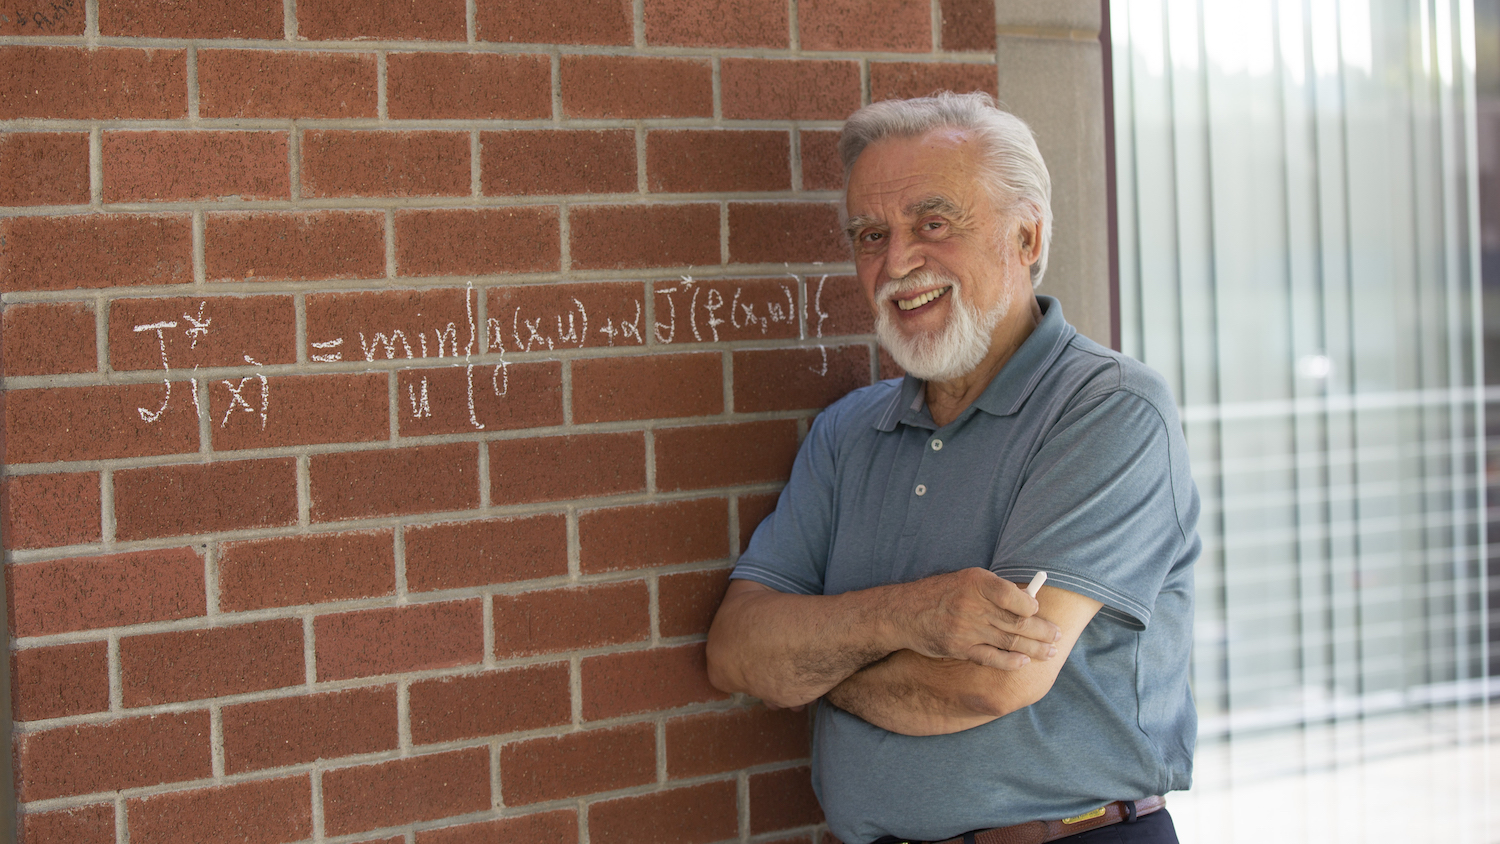 Dimitri Bertsekas stands in front of an ASU building on which he's written a mathematical equation in chalk